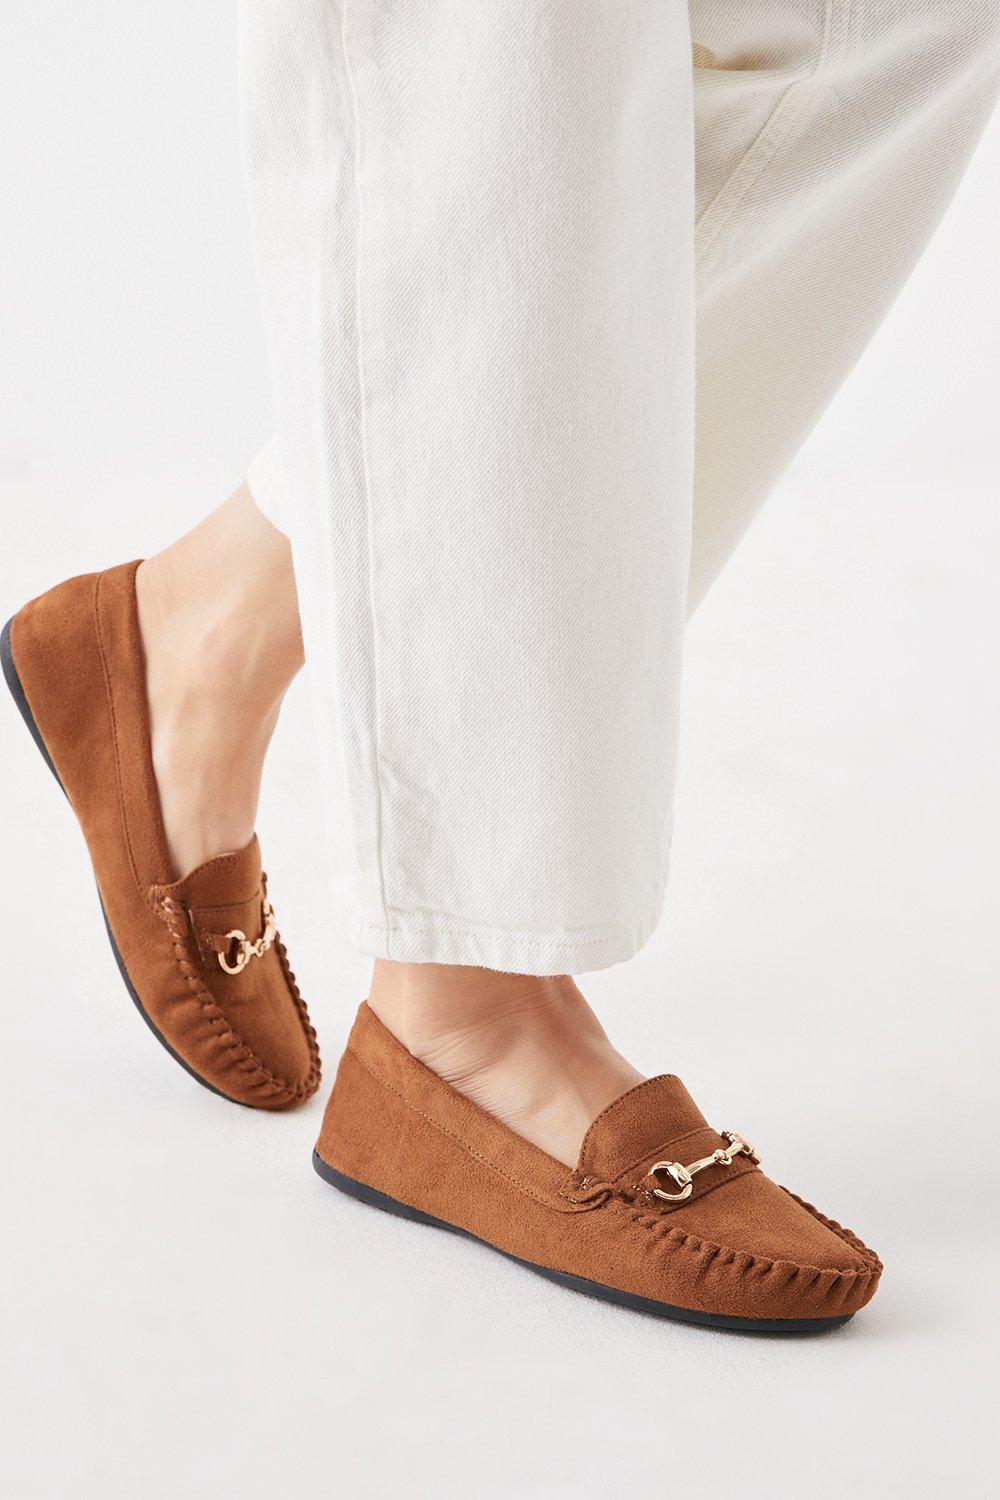 Women’s Good For The Sole: Nina Comfort Moccasin Loafers - tan - 7